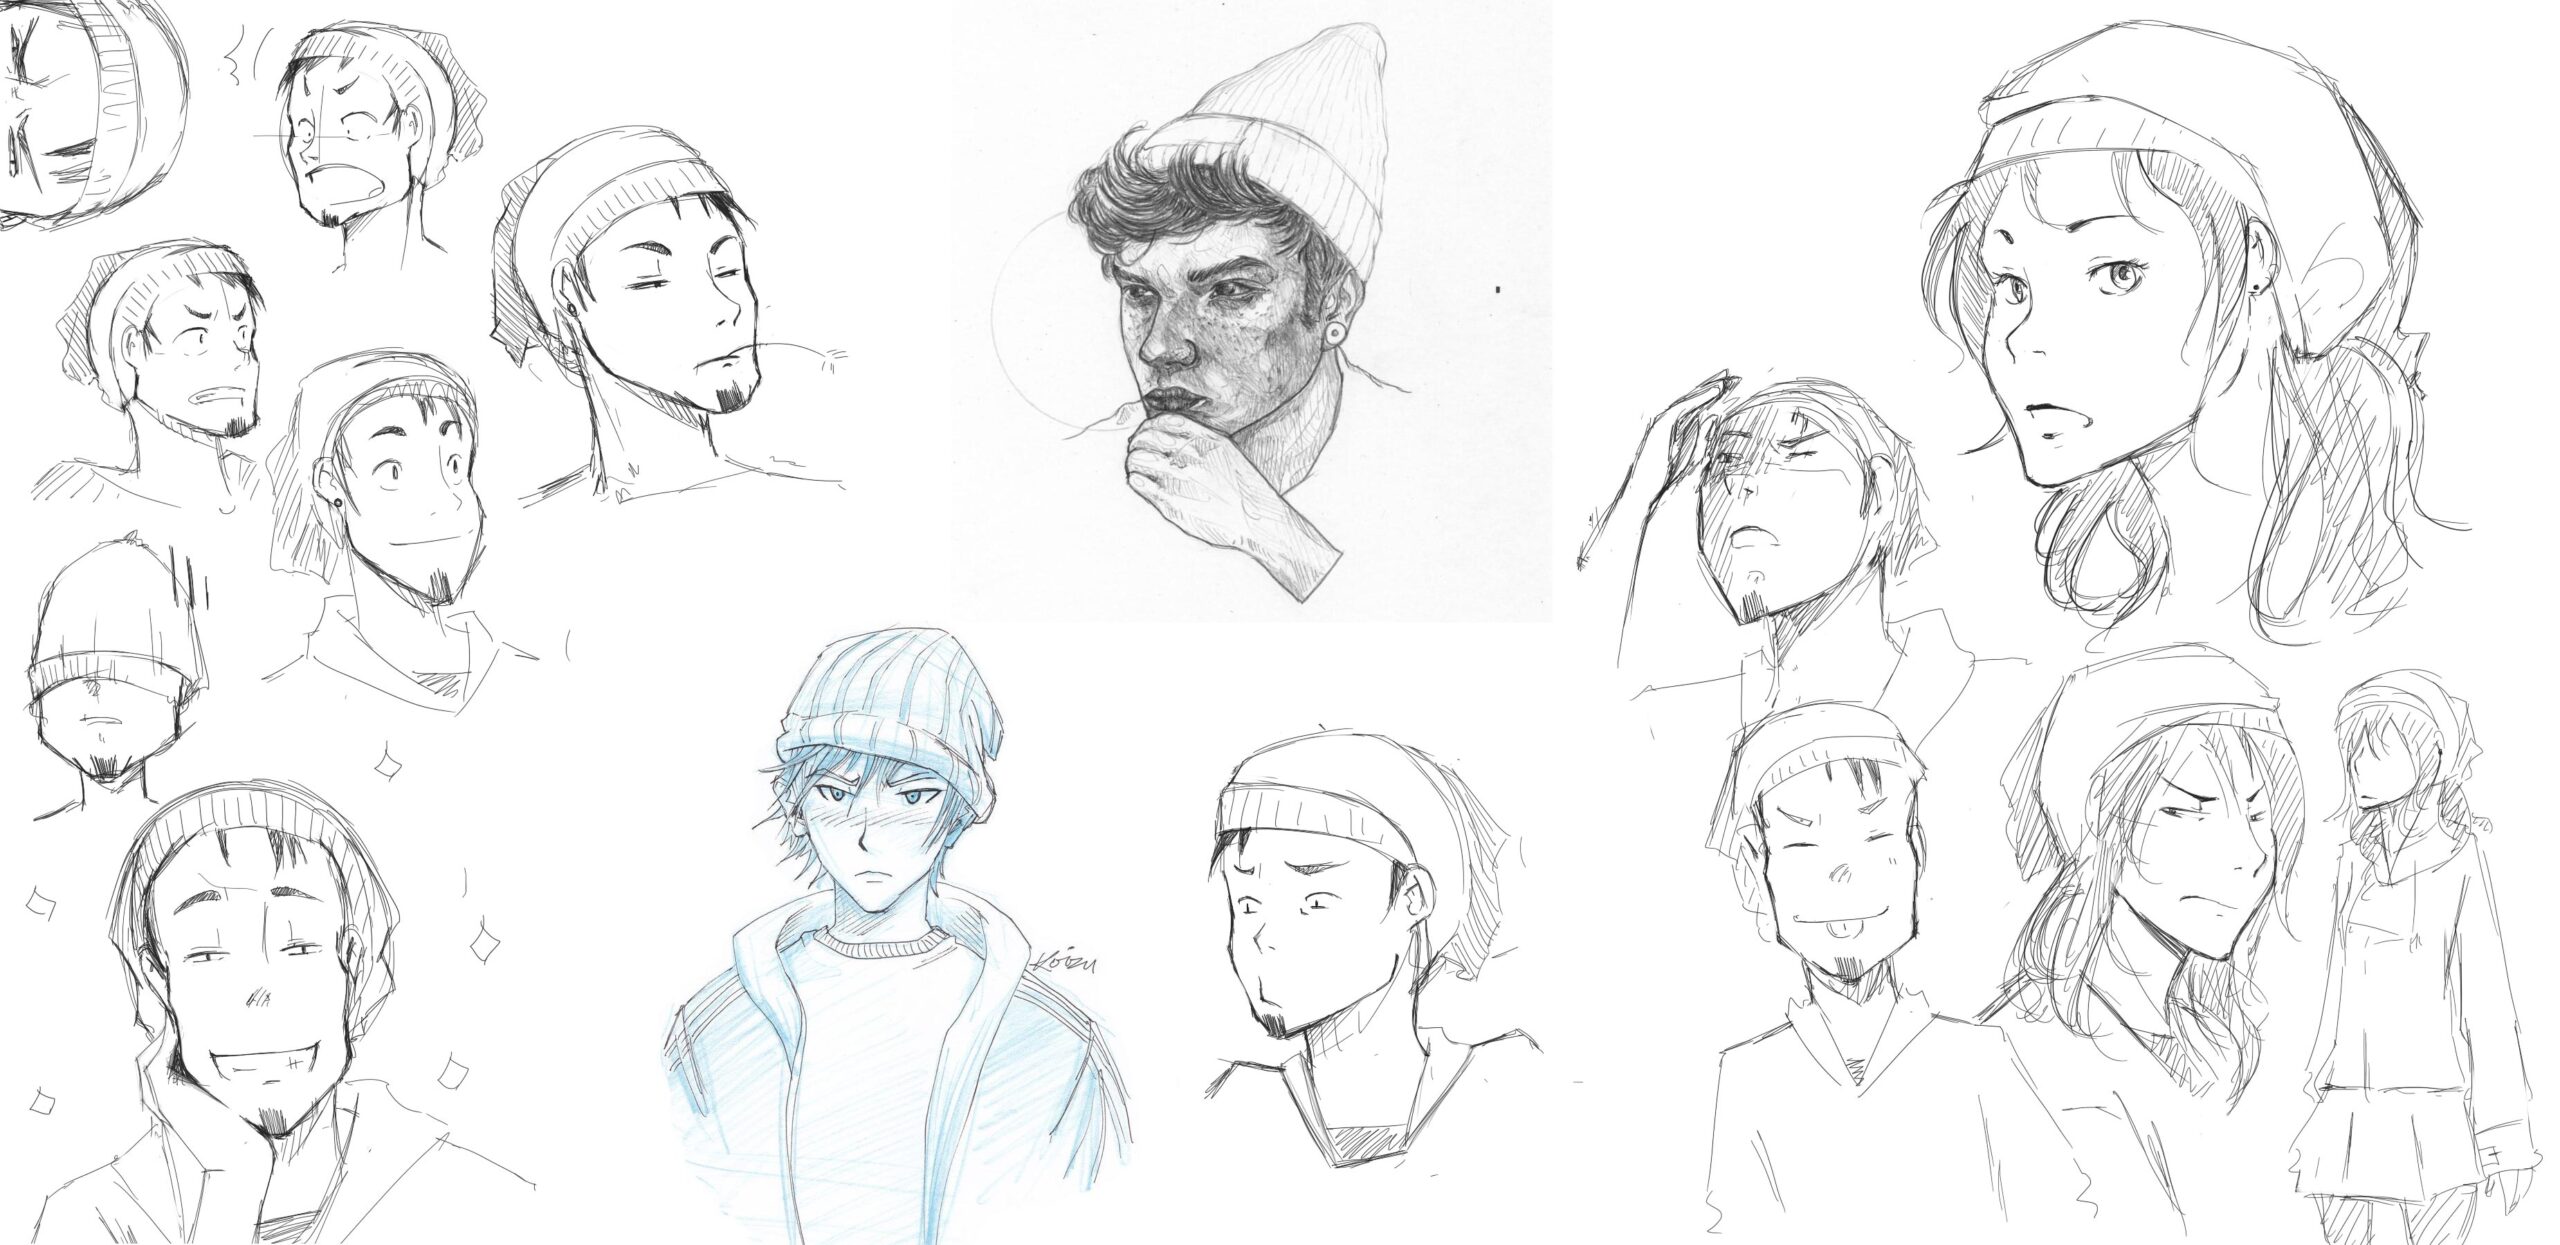 Beanie drawing reference